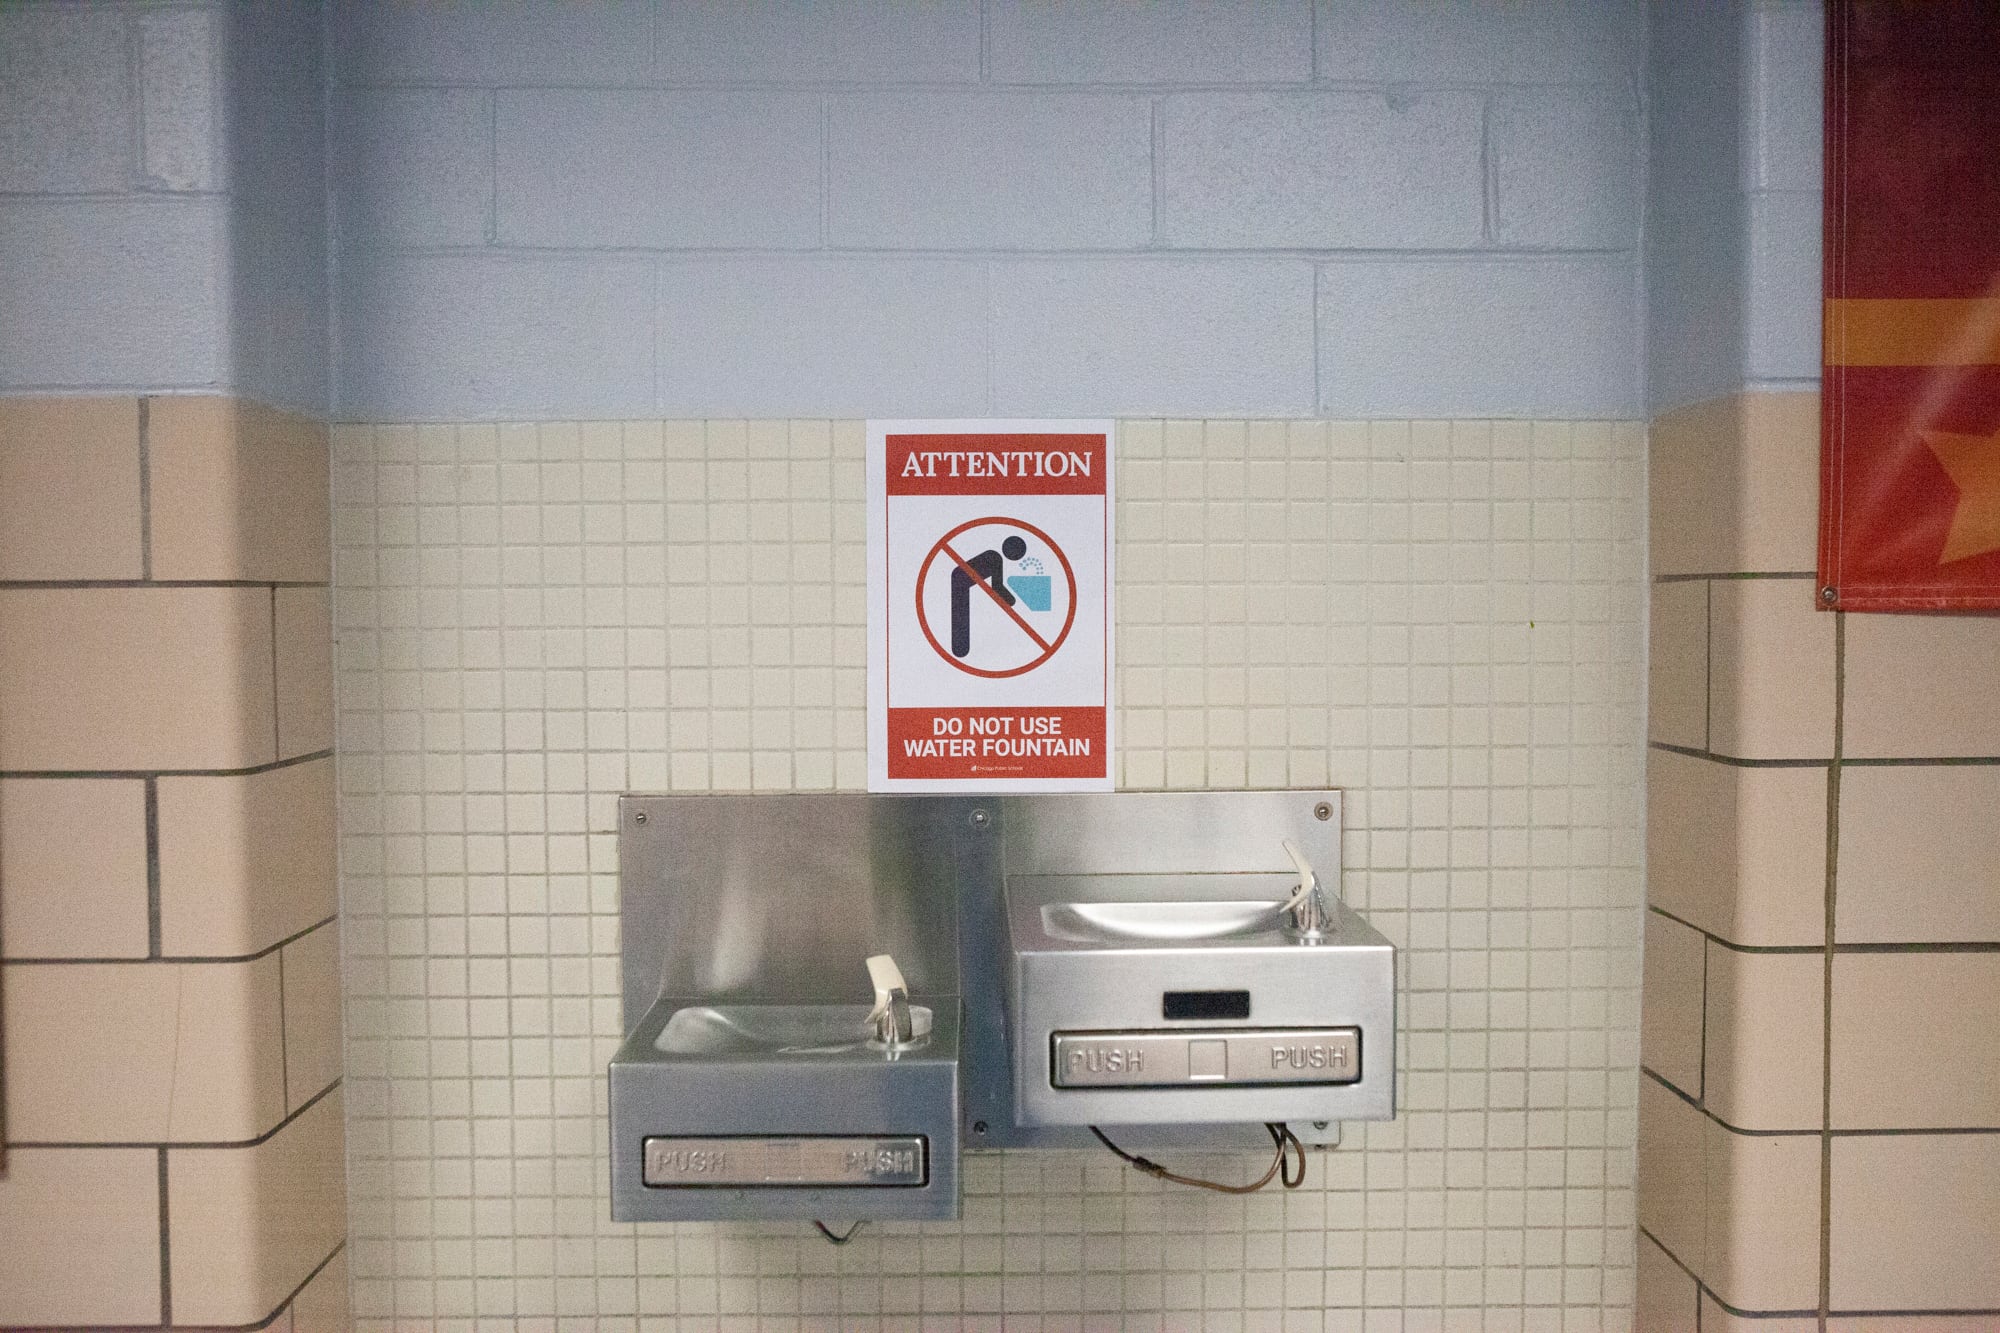 A sign between two water fountains that reads: Attention. Do not use water fountain.